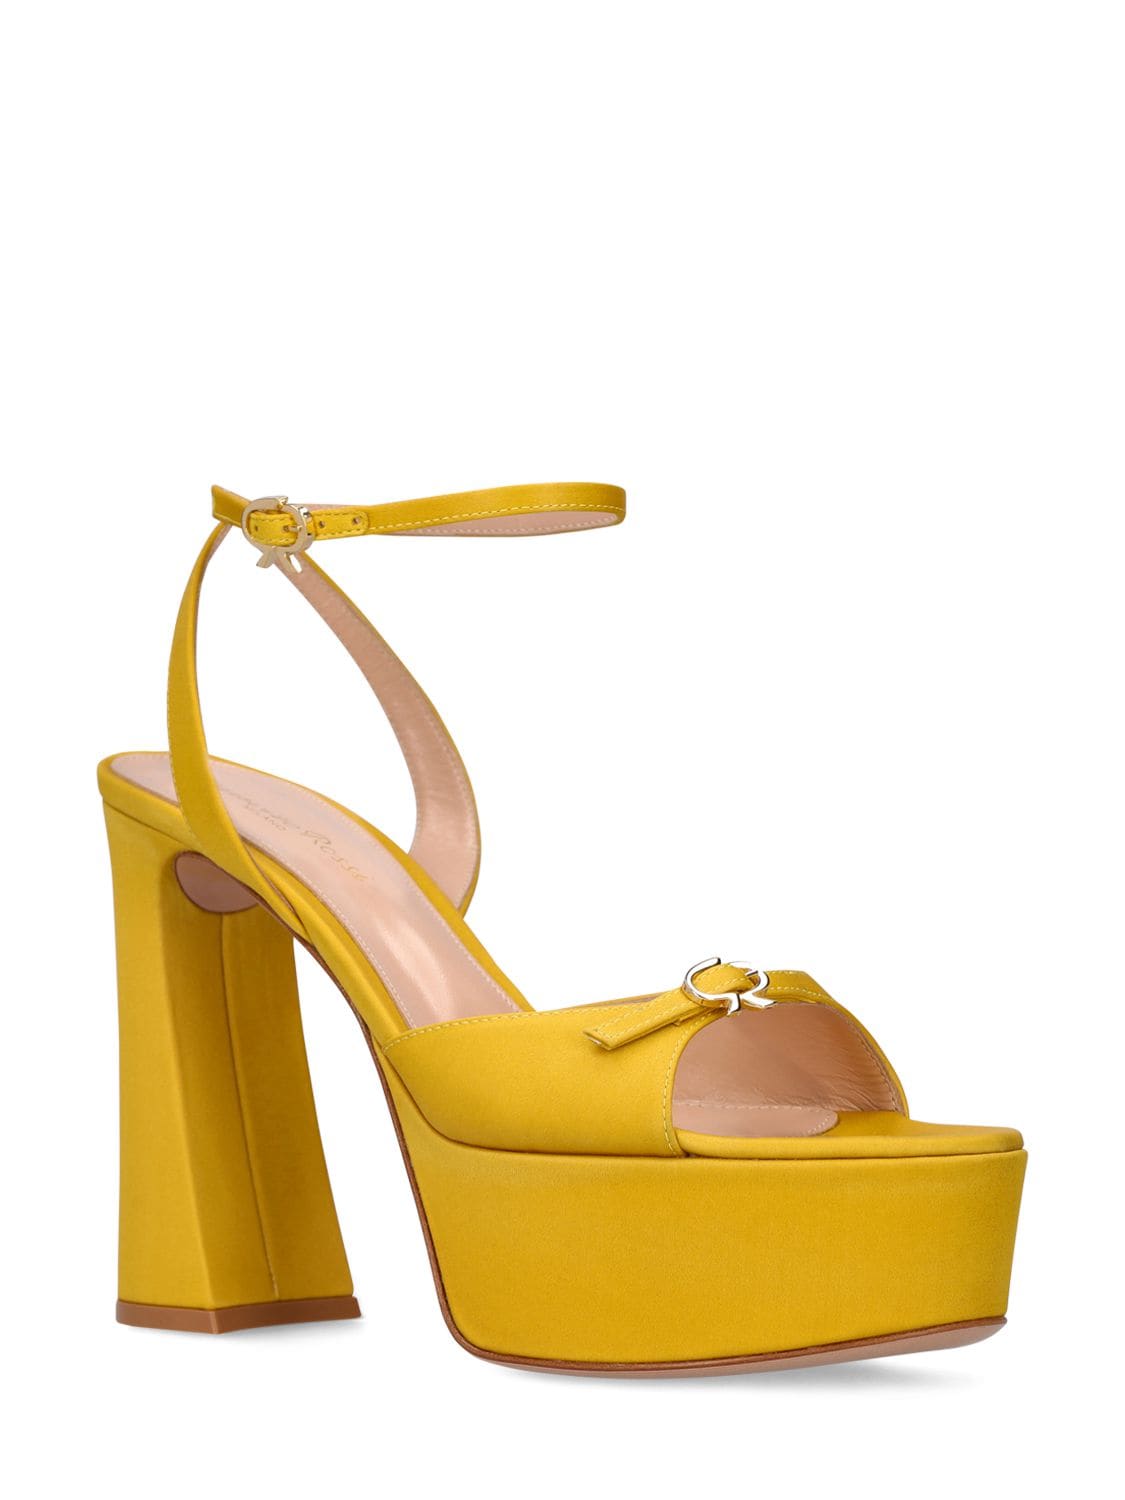 Shop Gianvito Rossi 105mm Maddy Satin Platform Sandals In Yellow